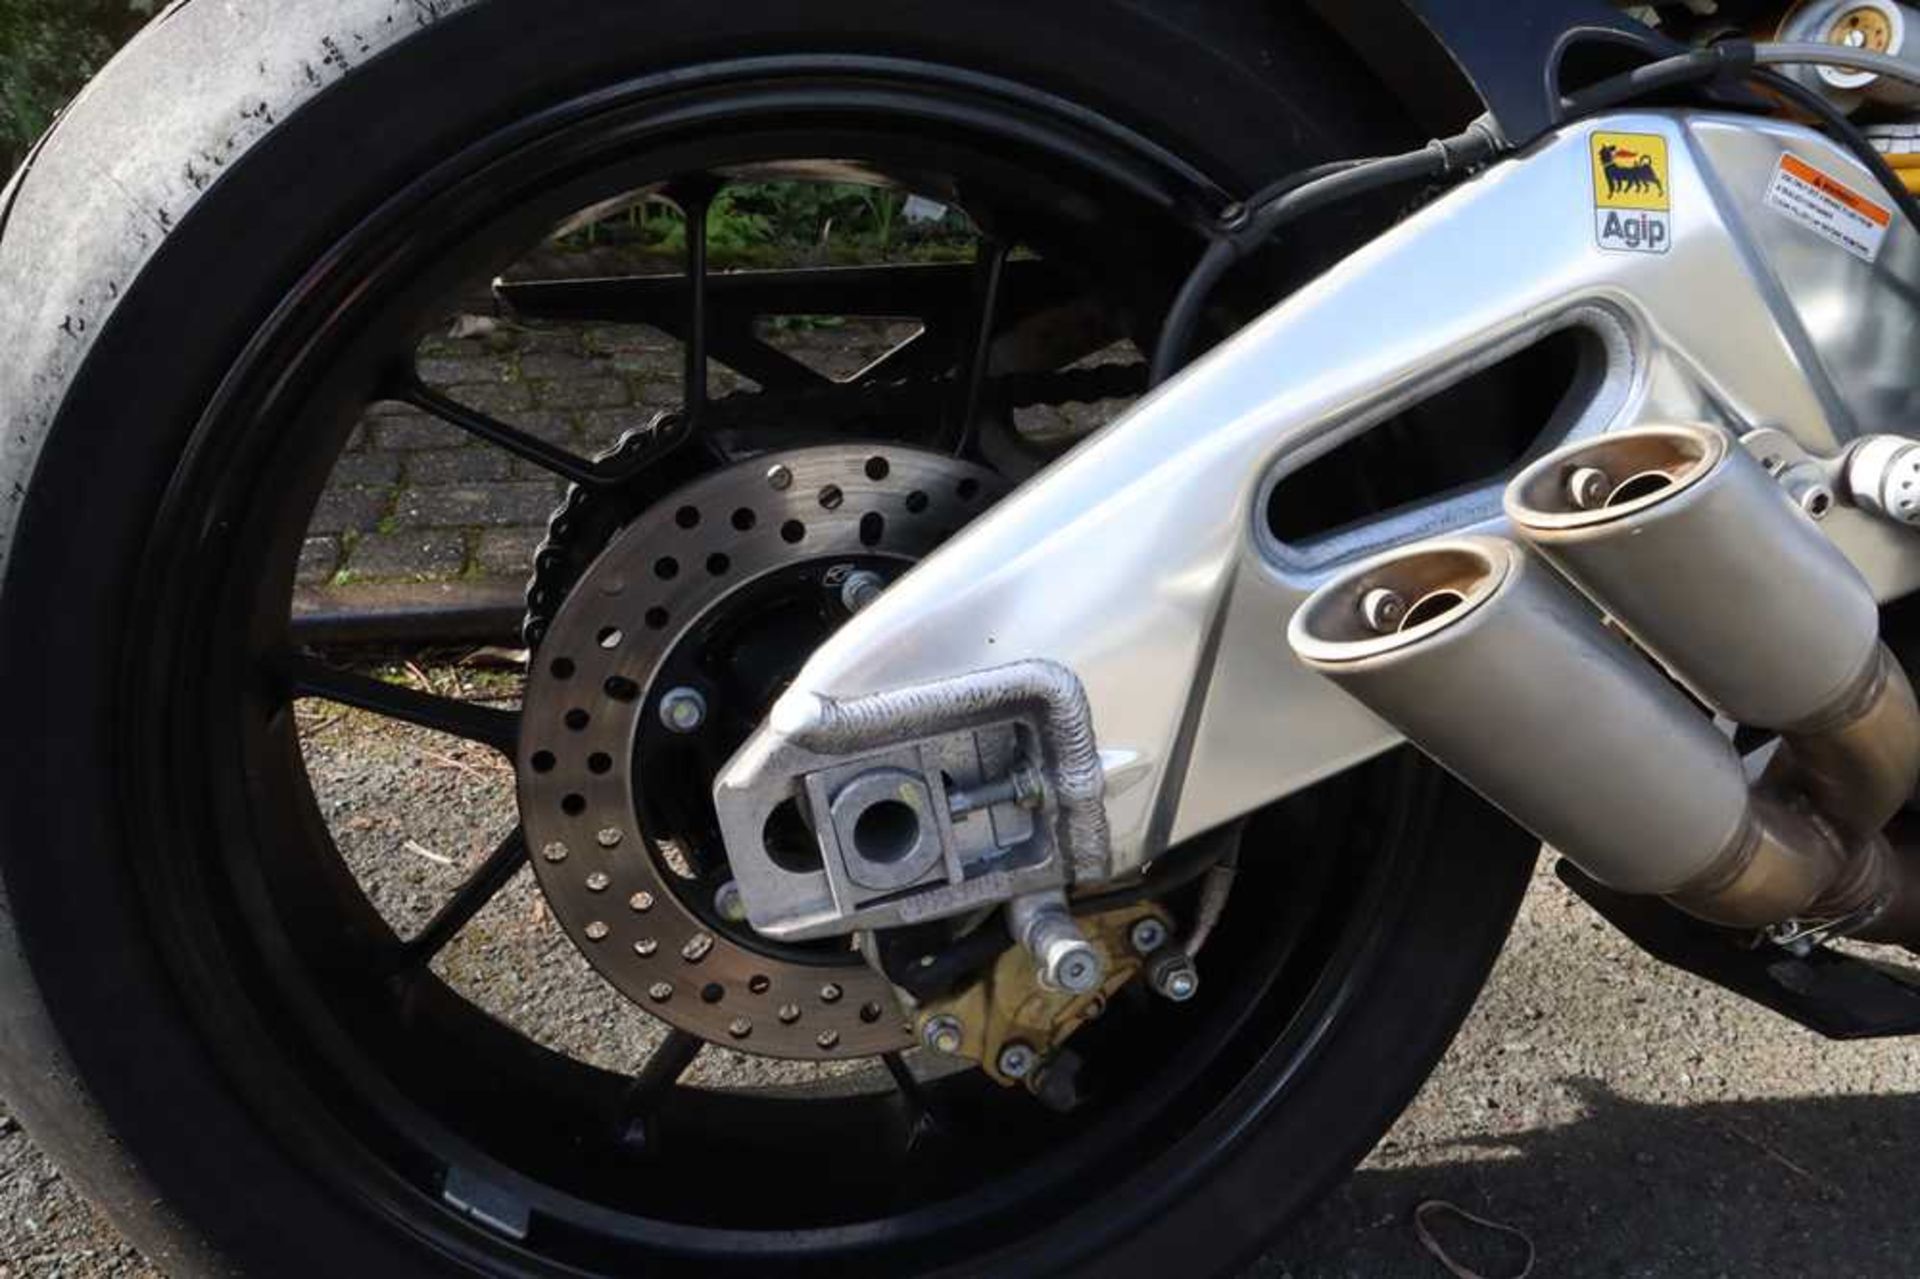 2010 Aprilia RSV4R Fitted with Moto GP style exhaust, original included - Image 29 of 44